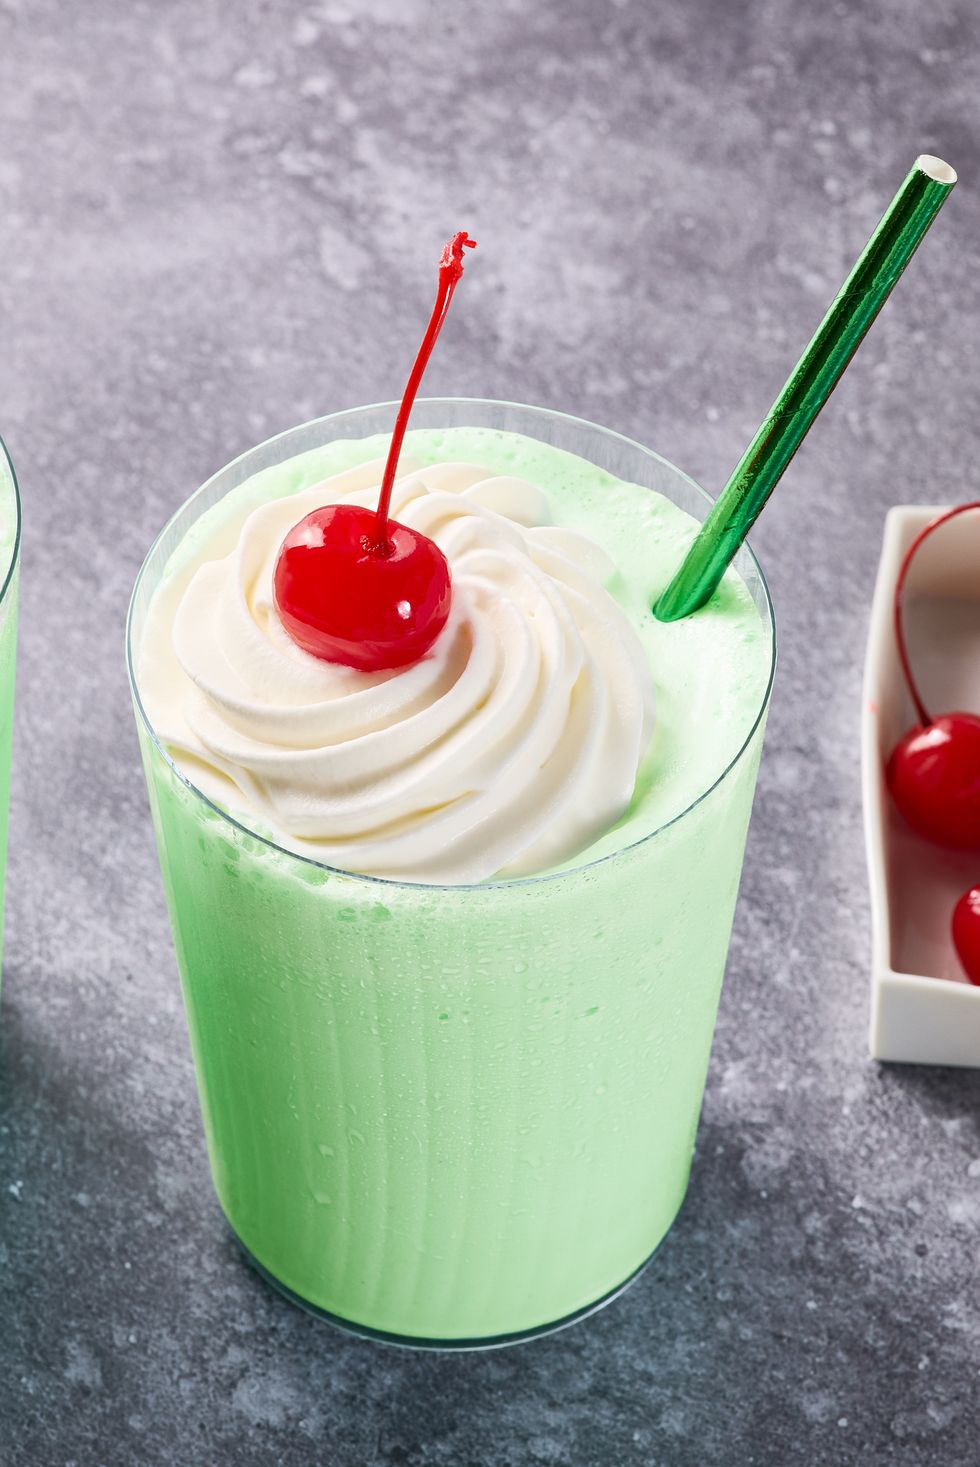 green shake in a glass with whipped cream, a cherry, and a green straw